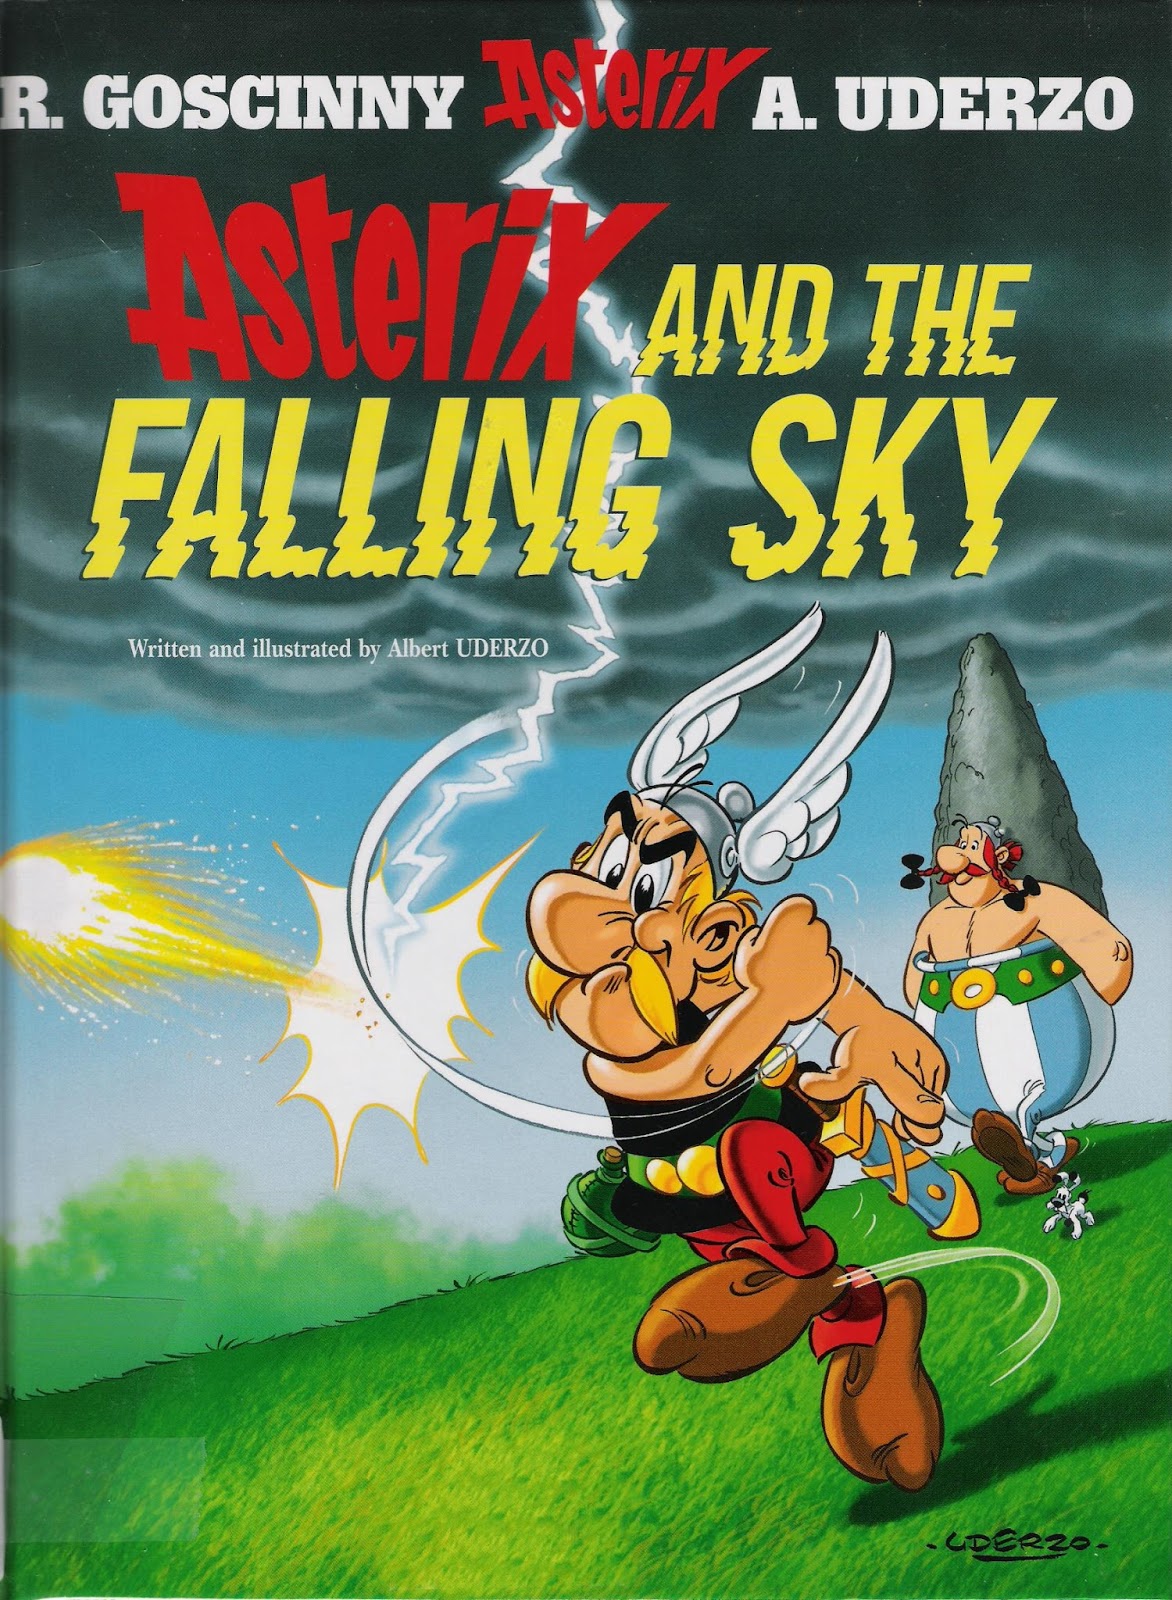 Asterix Viewcomic Reading Comics Online For Free 2021 P